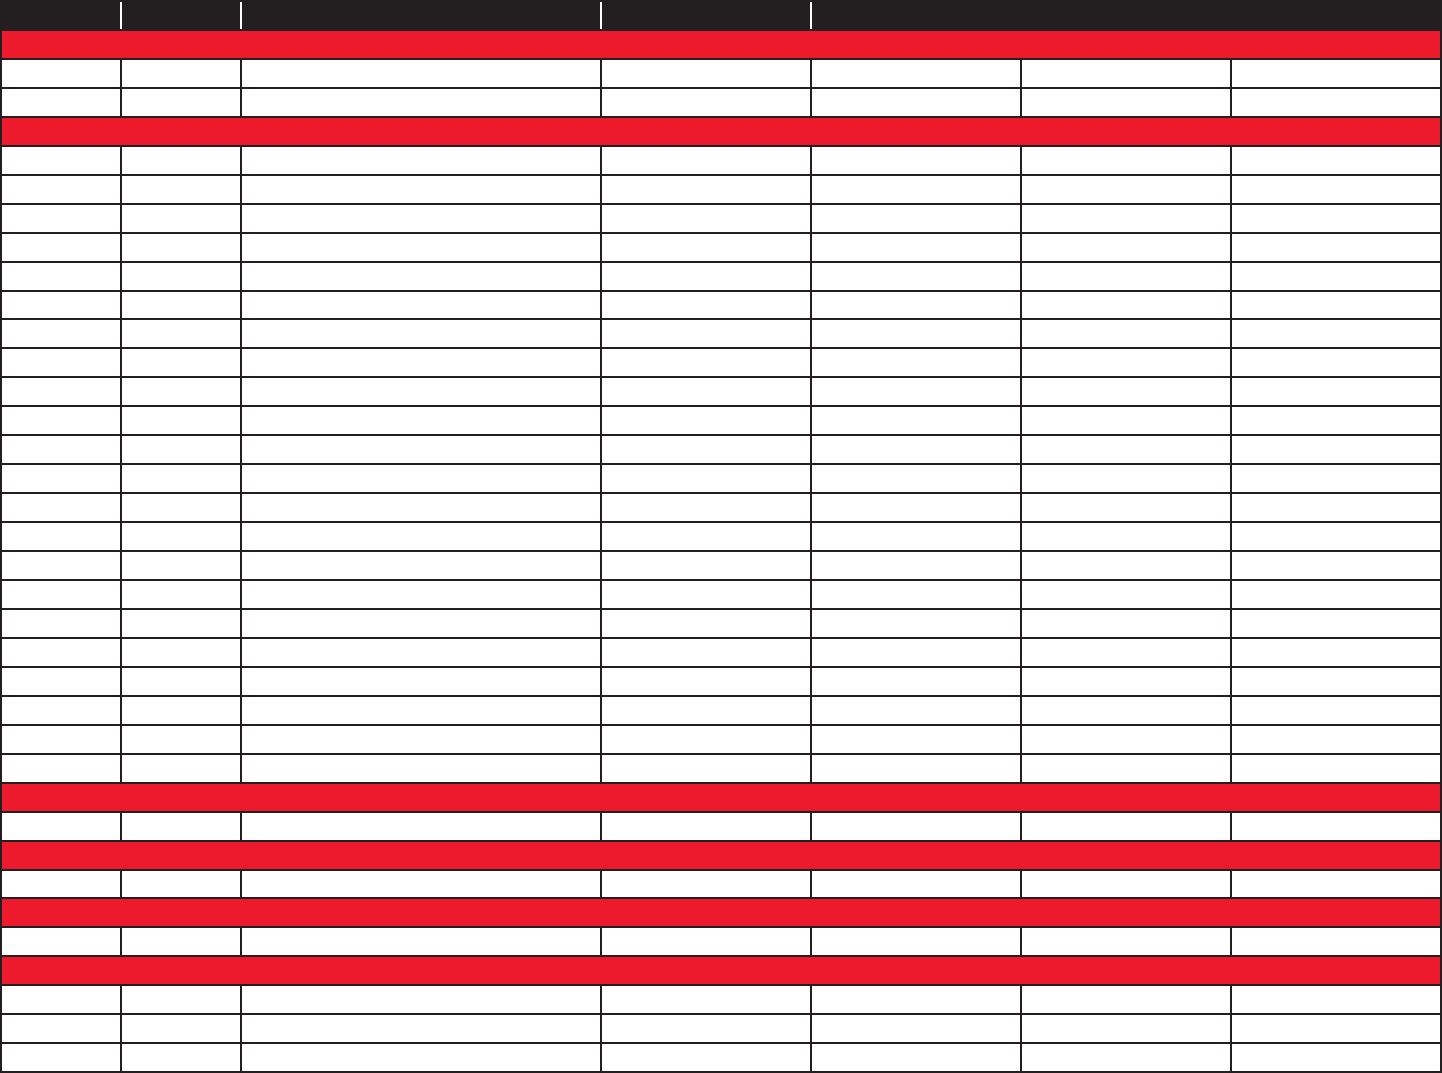 Specialized Hanger Fit Chart 2017